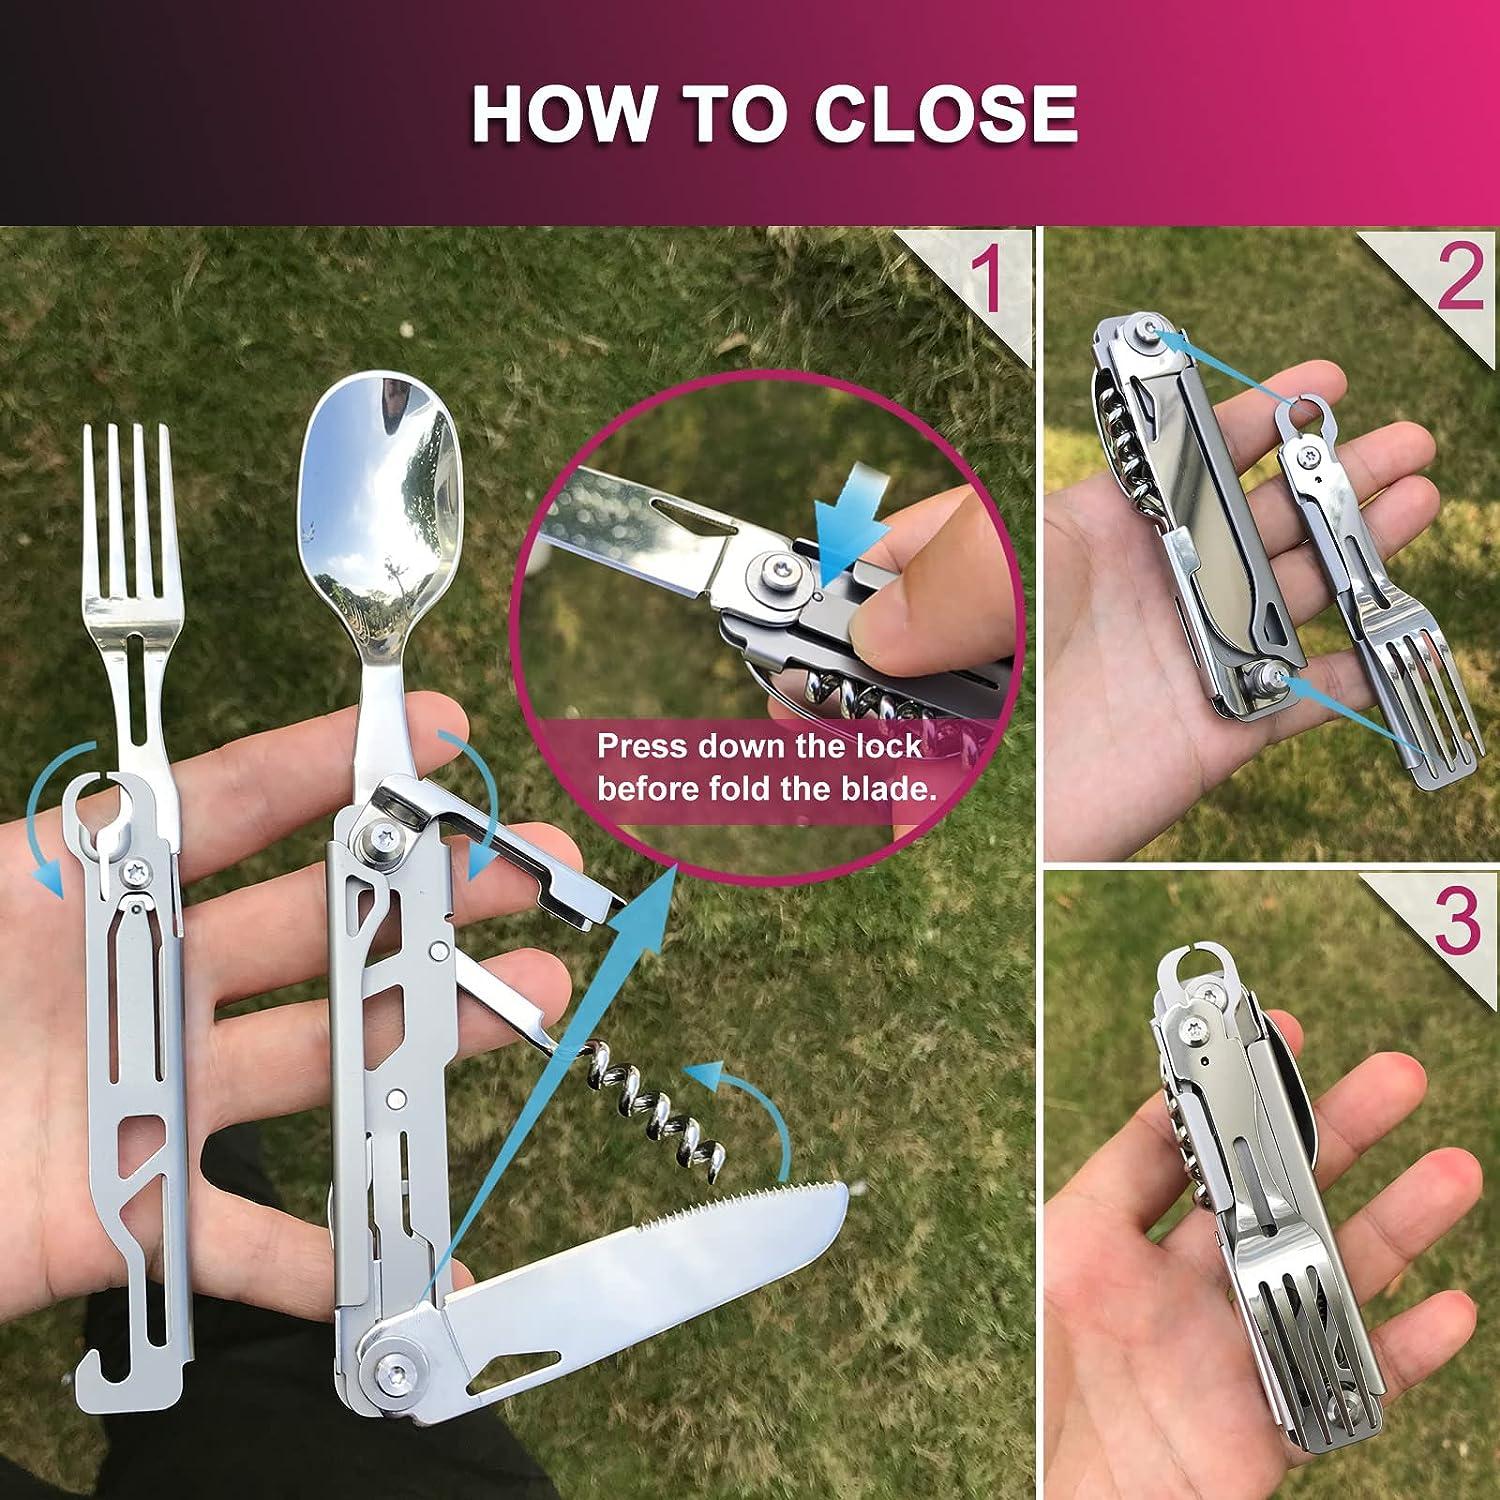 Portable Stainless Steel Cutlery Set With Foldable Fork, Spoon